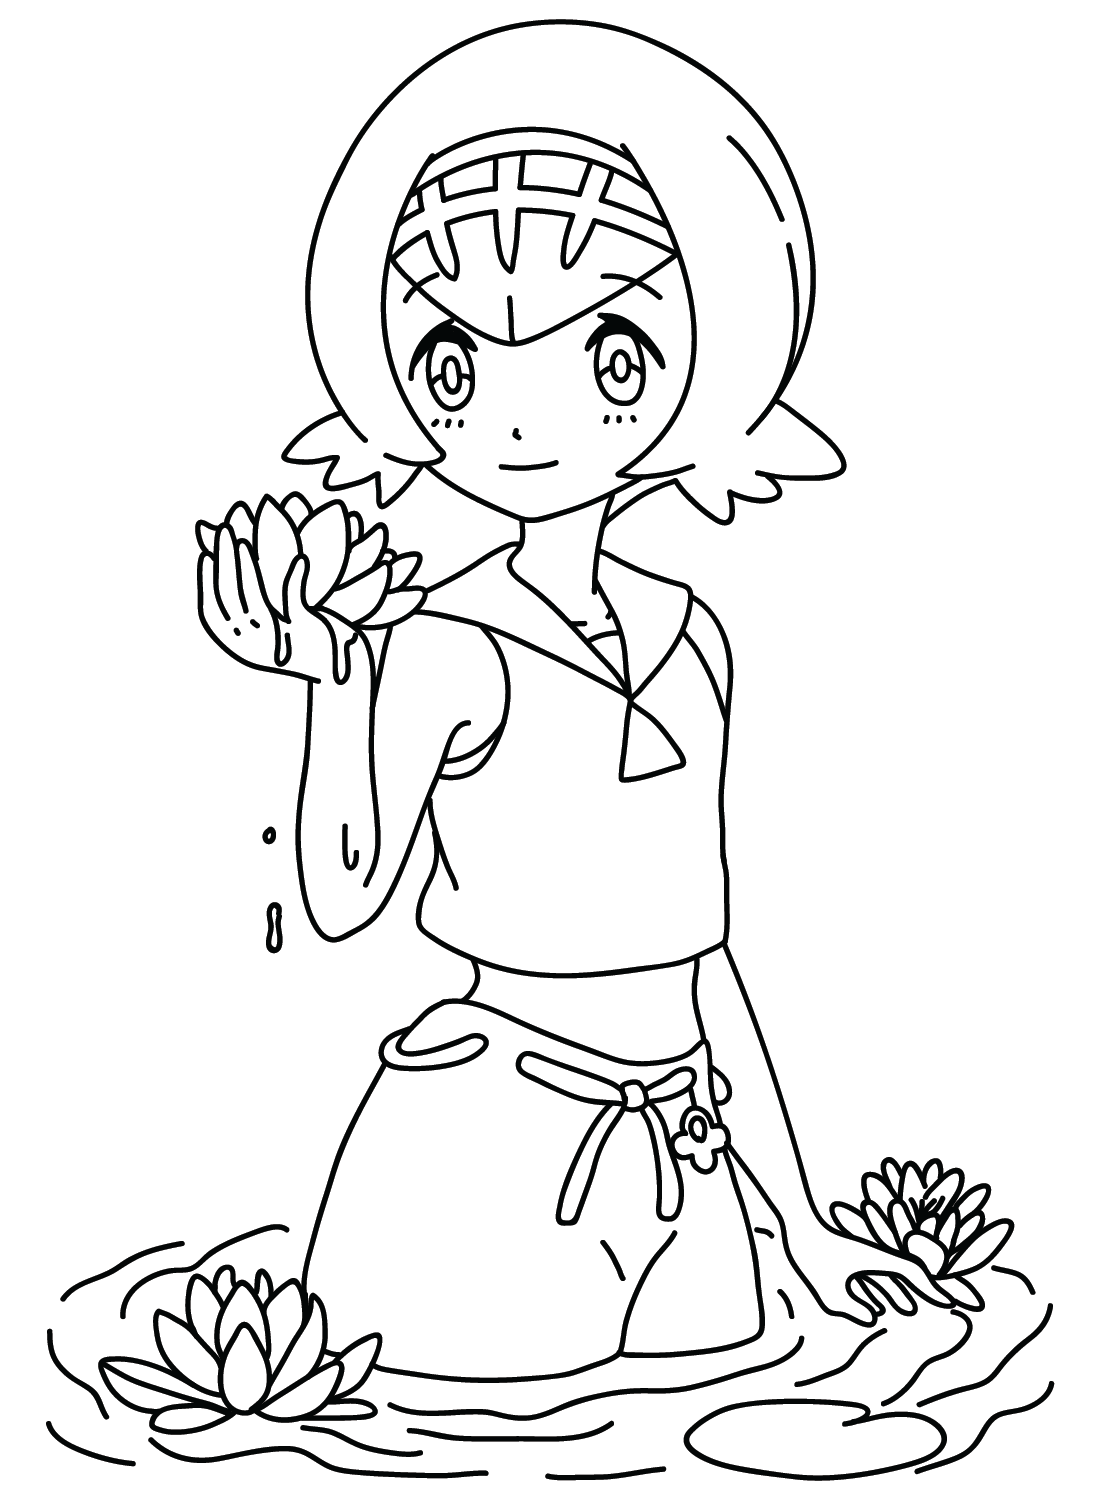 Lana Pokemon Picture to Color from Lana Pokemon